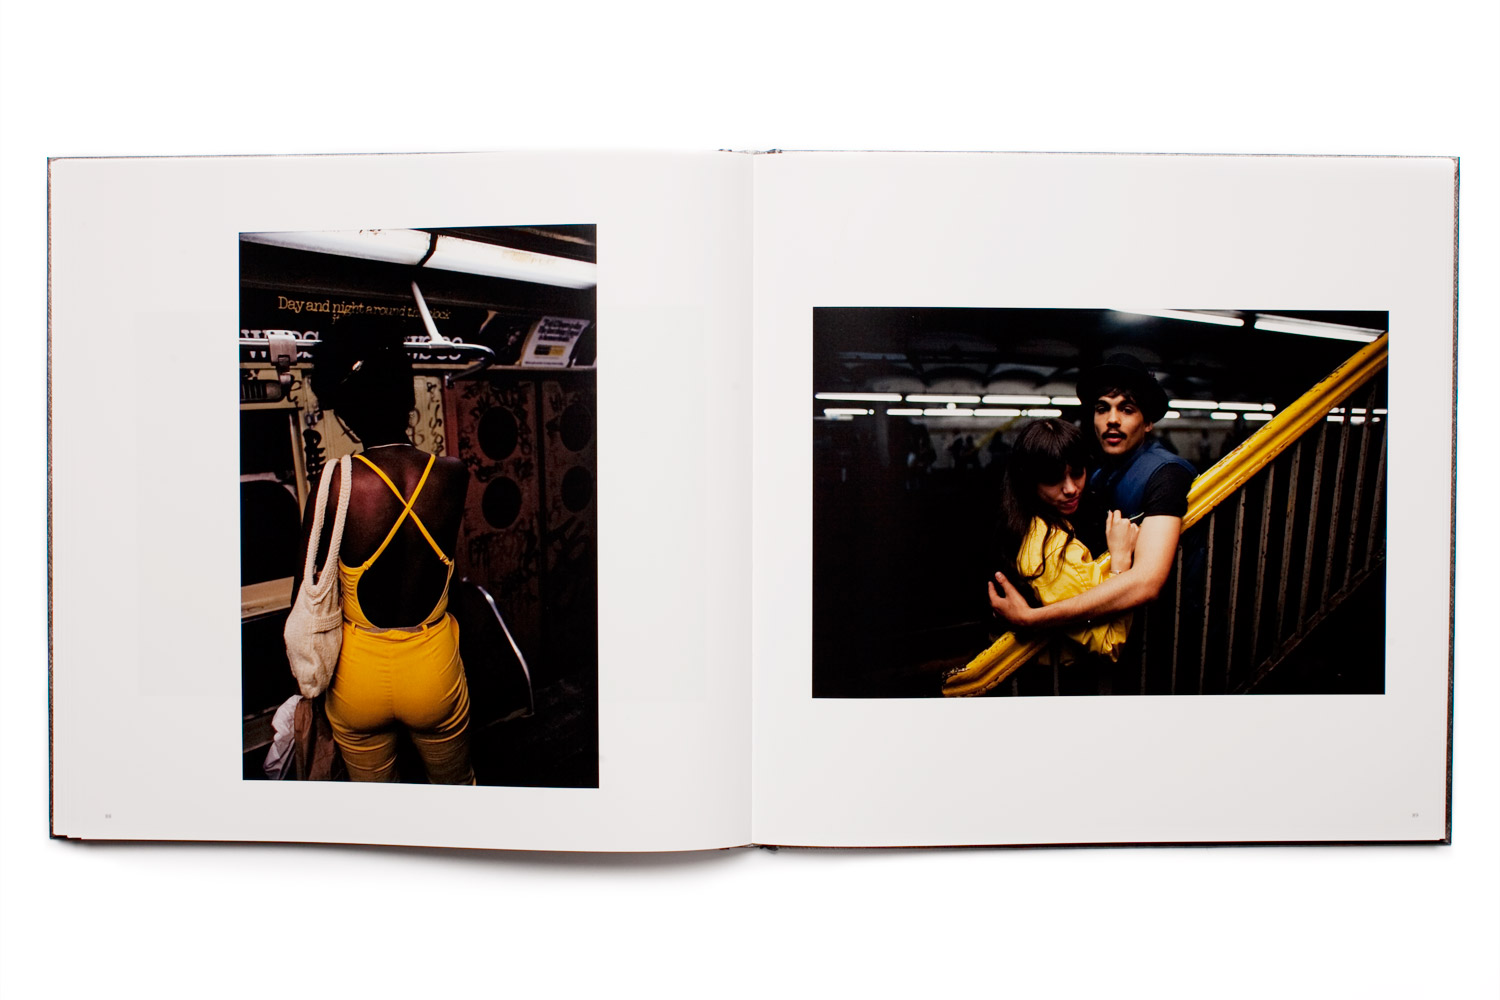 The larger format book, cleaner printing and improved image sequencing showcase the photographs in the republished edition to even greater effect.